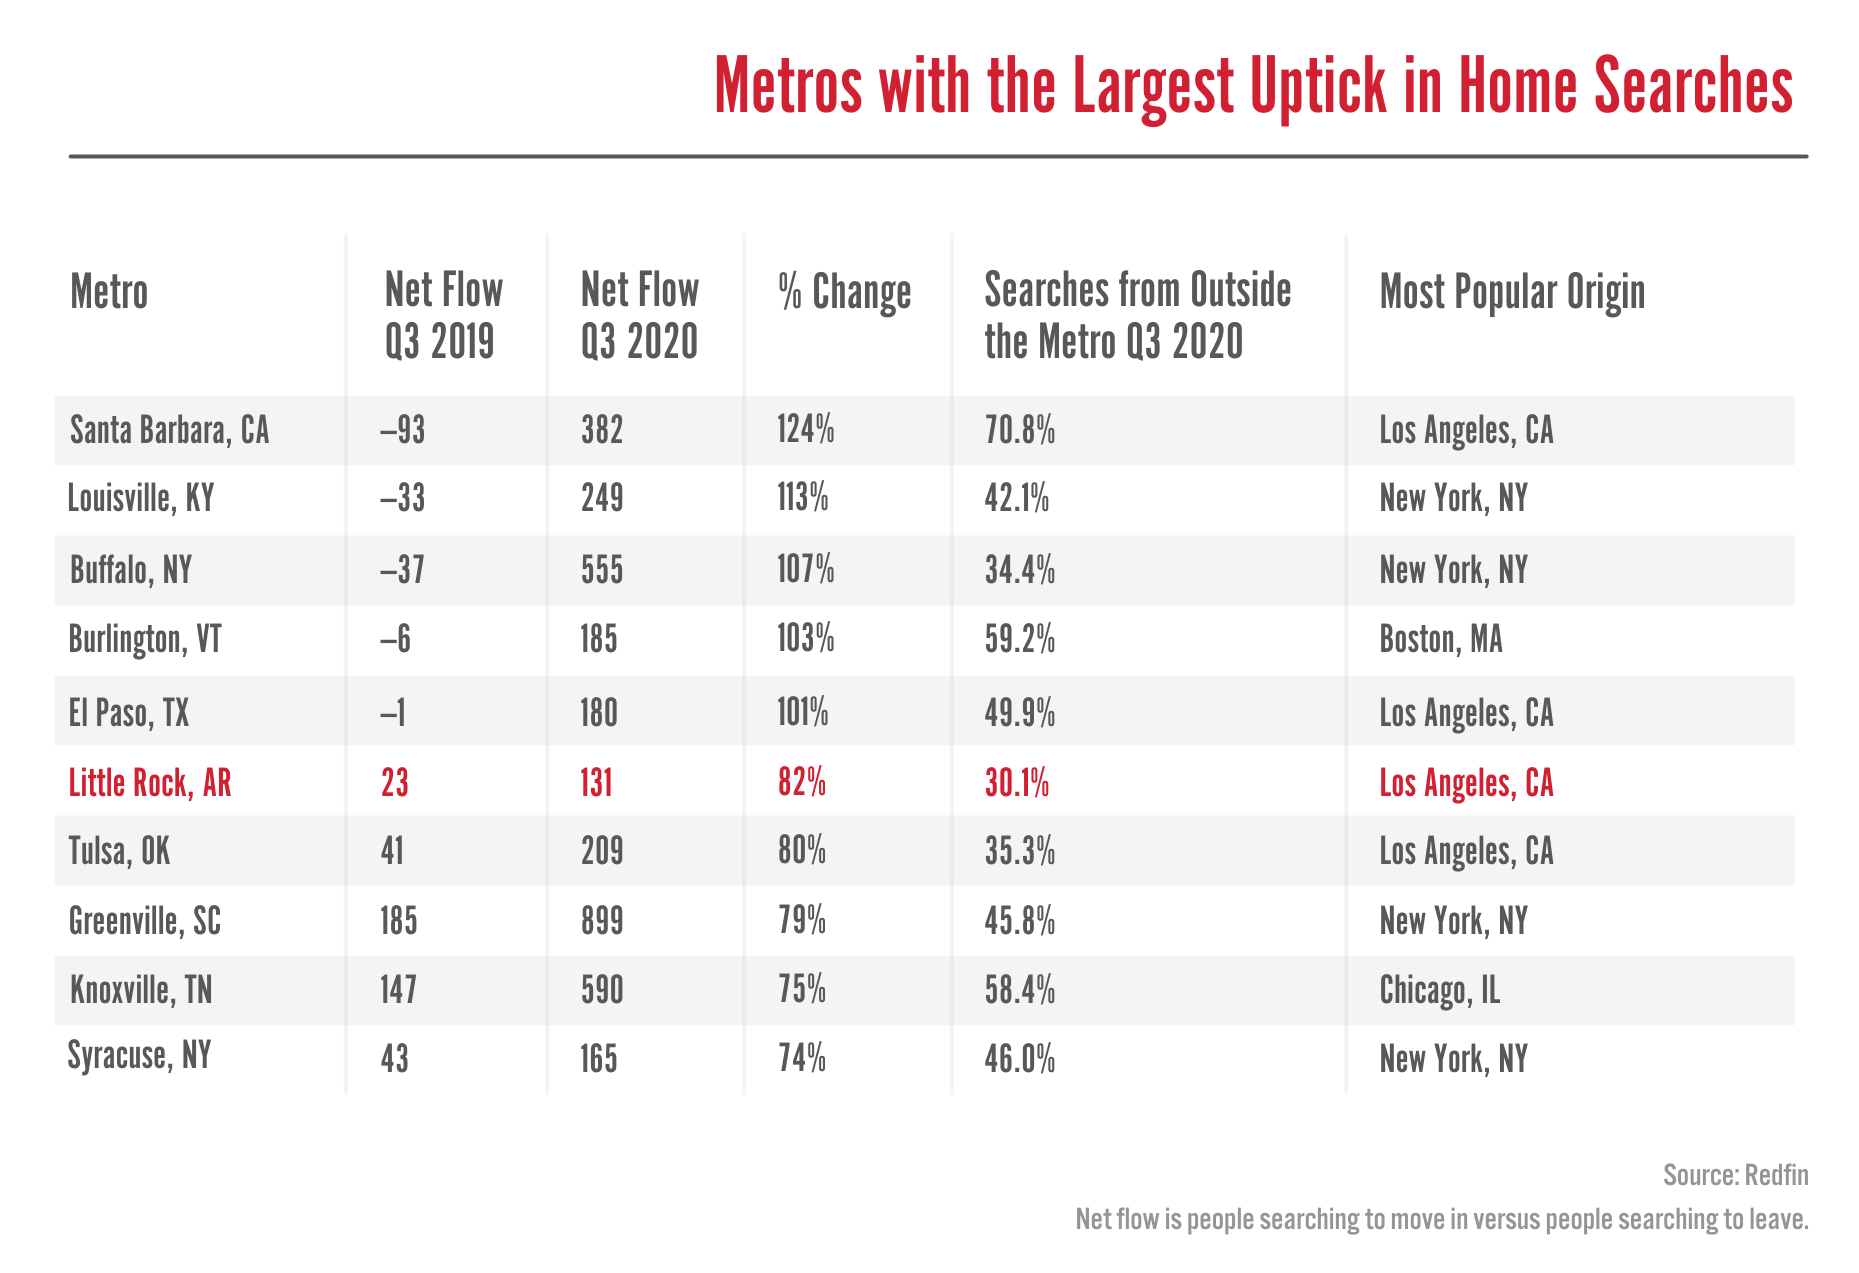 List of Metros with the Largest Uptick in Home Searches